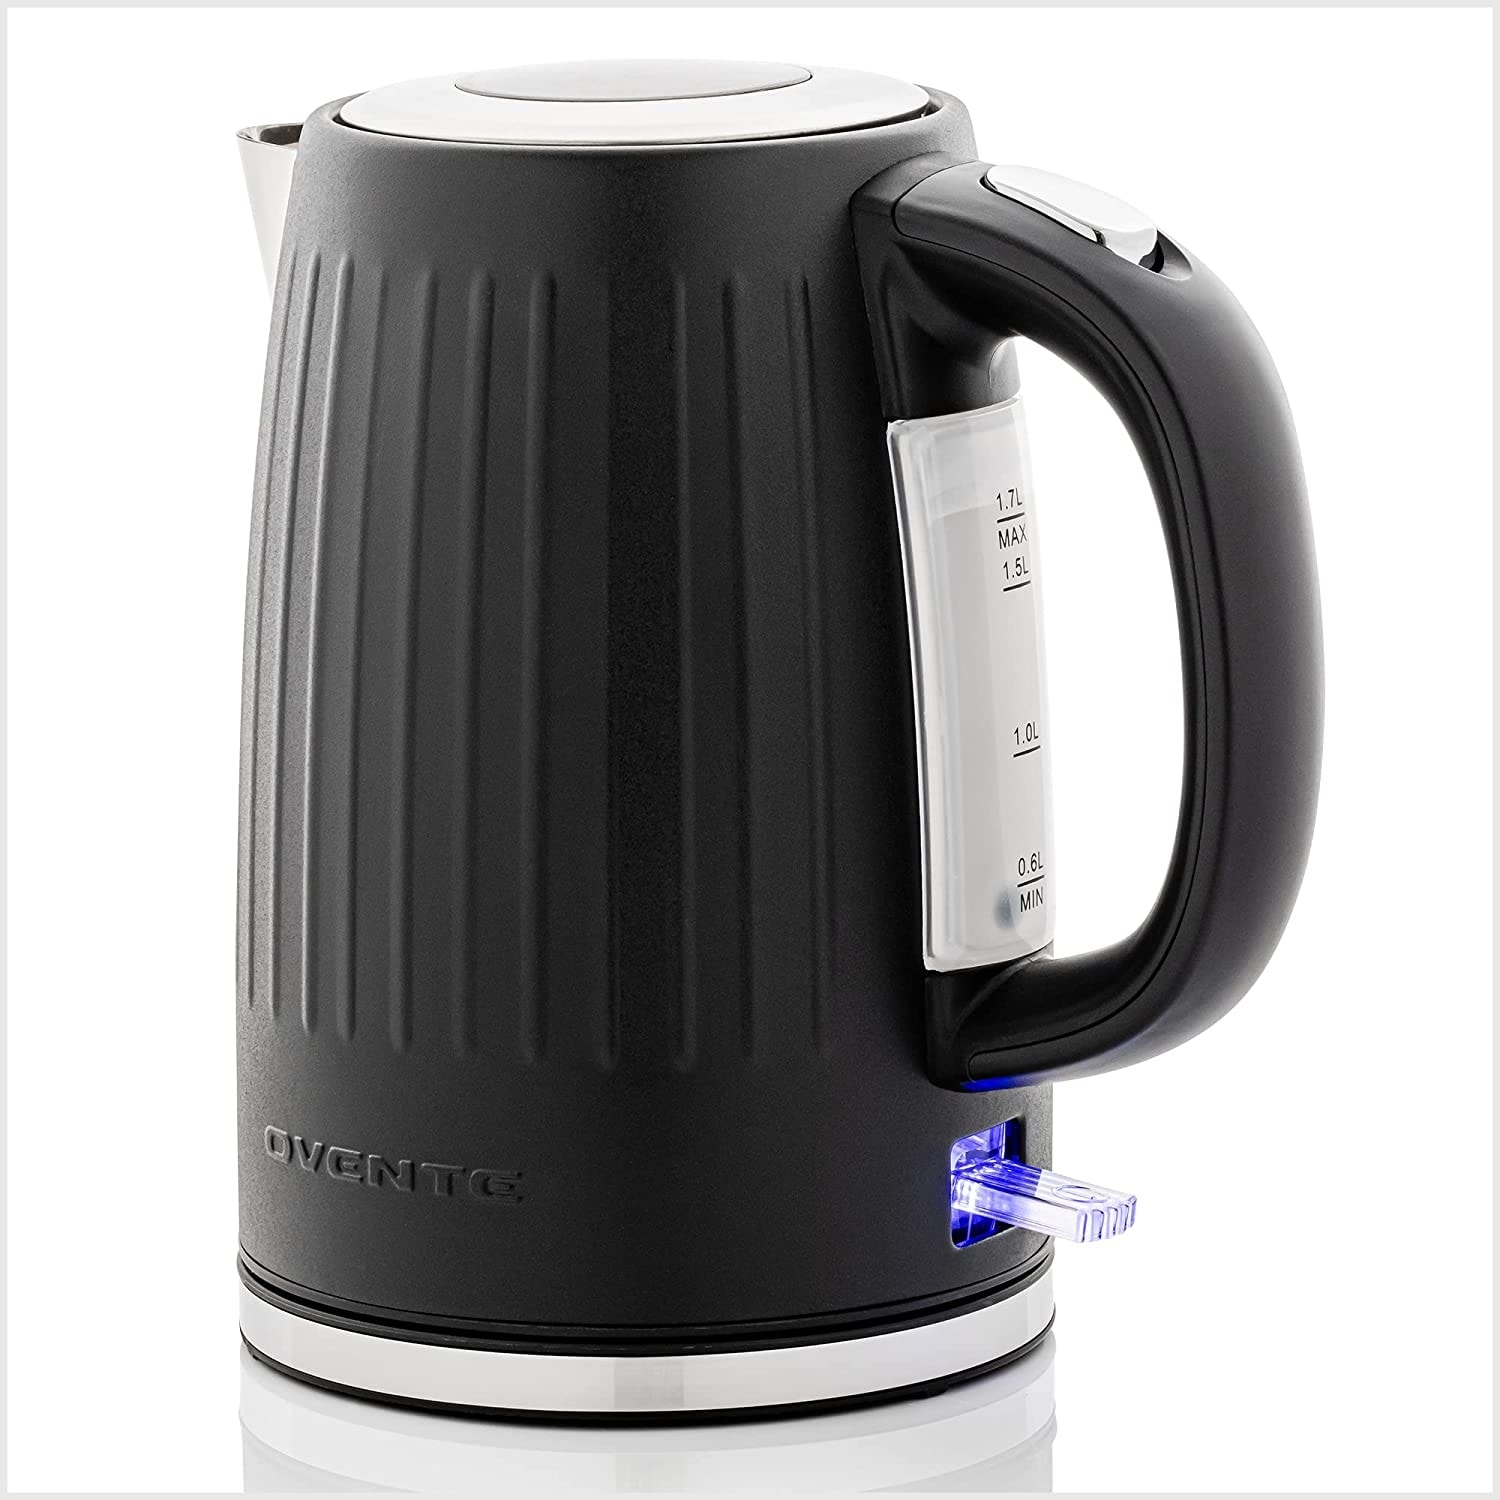 https://ak1.ostkcdn.com/images/products/is/images/direct/0aaafd6ba23fe40fda70c3133b61ae5400d35667/Ovente-Electric-Kettle-1.7-Liter-1750-Watts-Hot-Water-Boiler-with-Auto-Shutoff-%26-Boil-Dry-Protection-Tech%2C-KS711-Series.jpg